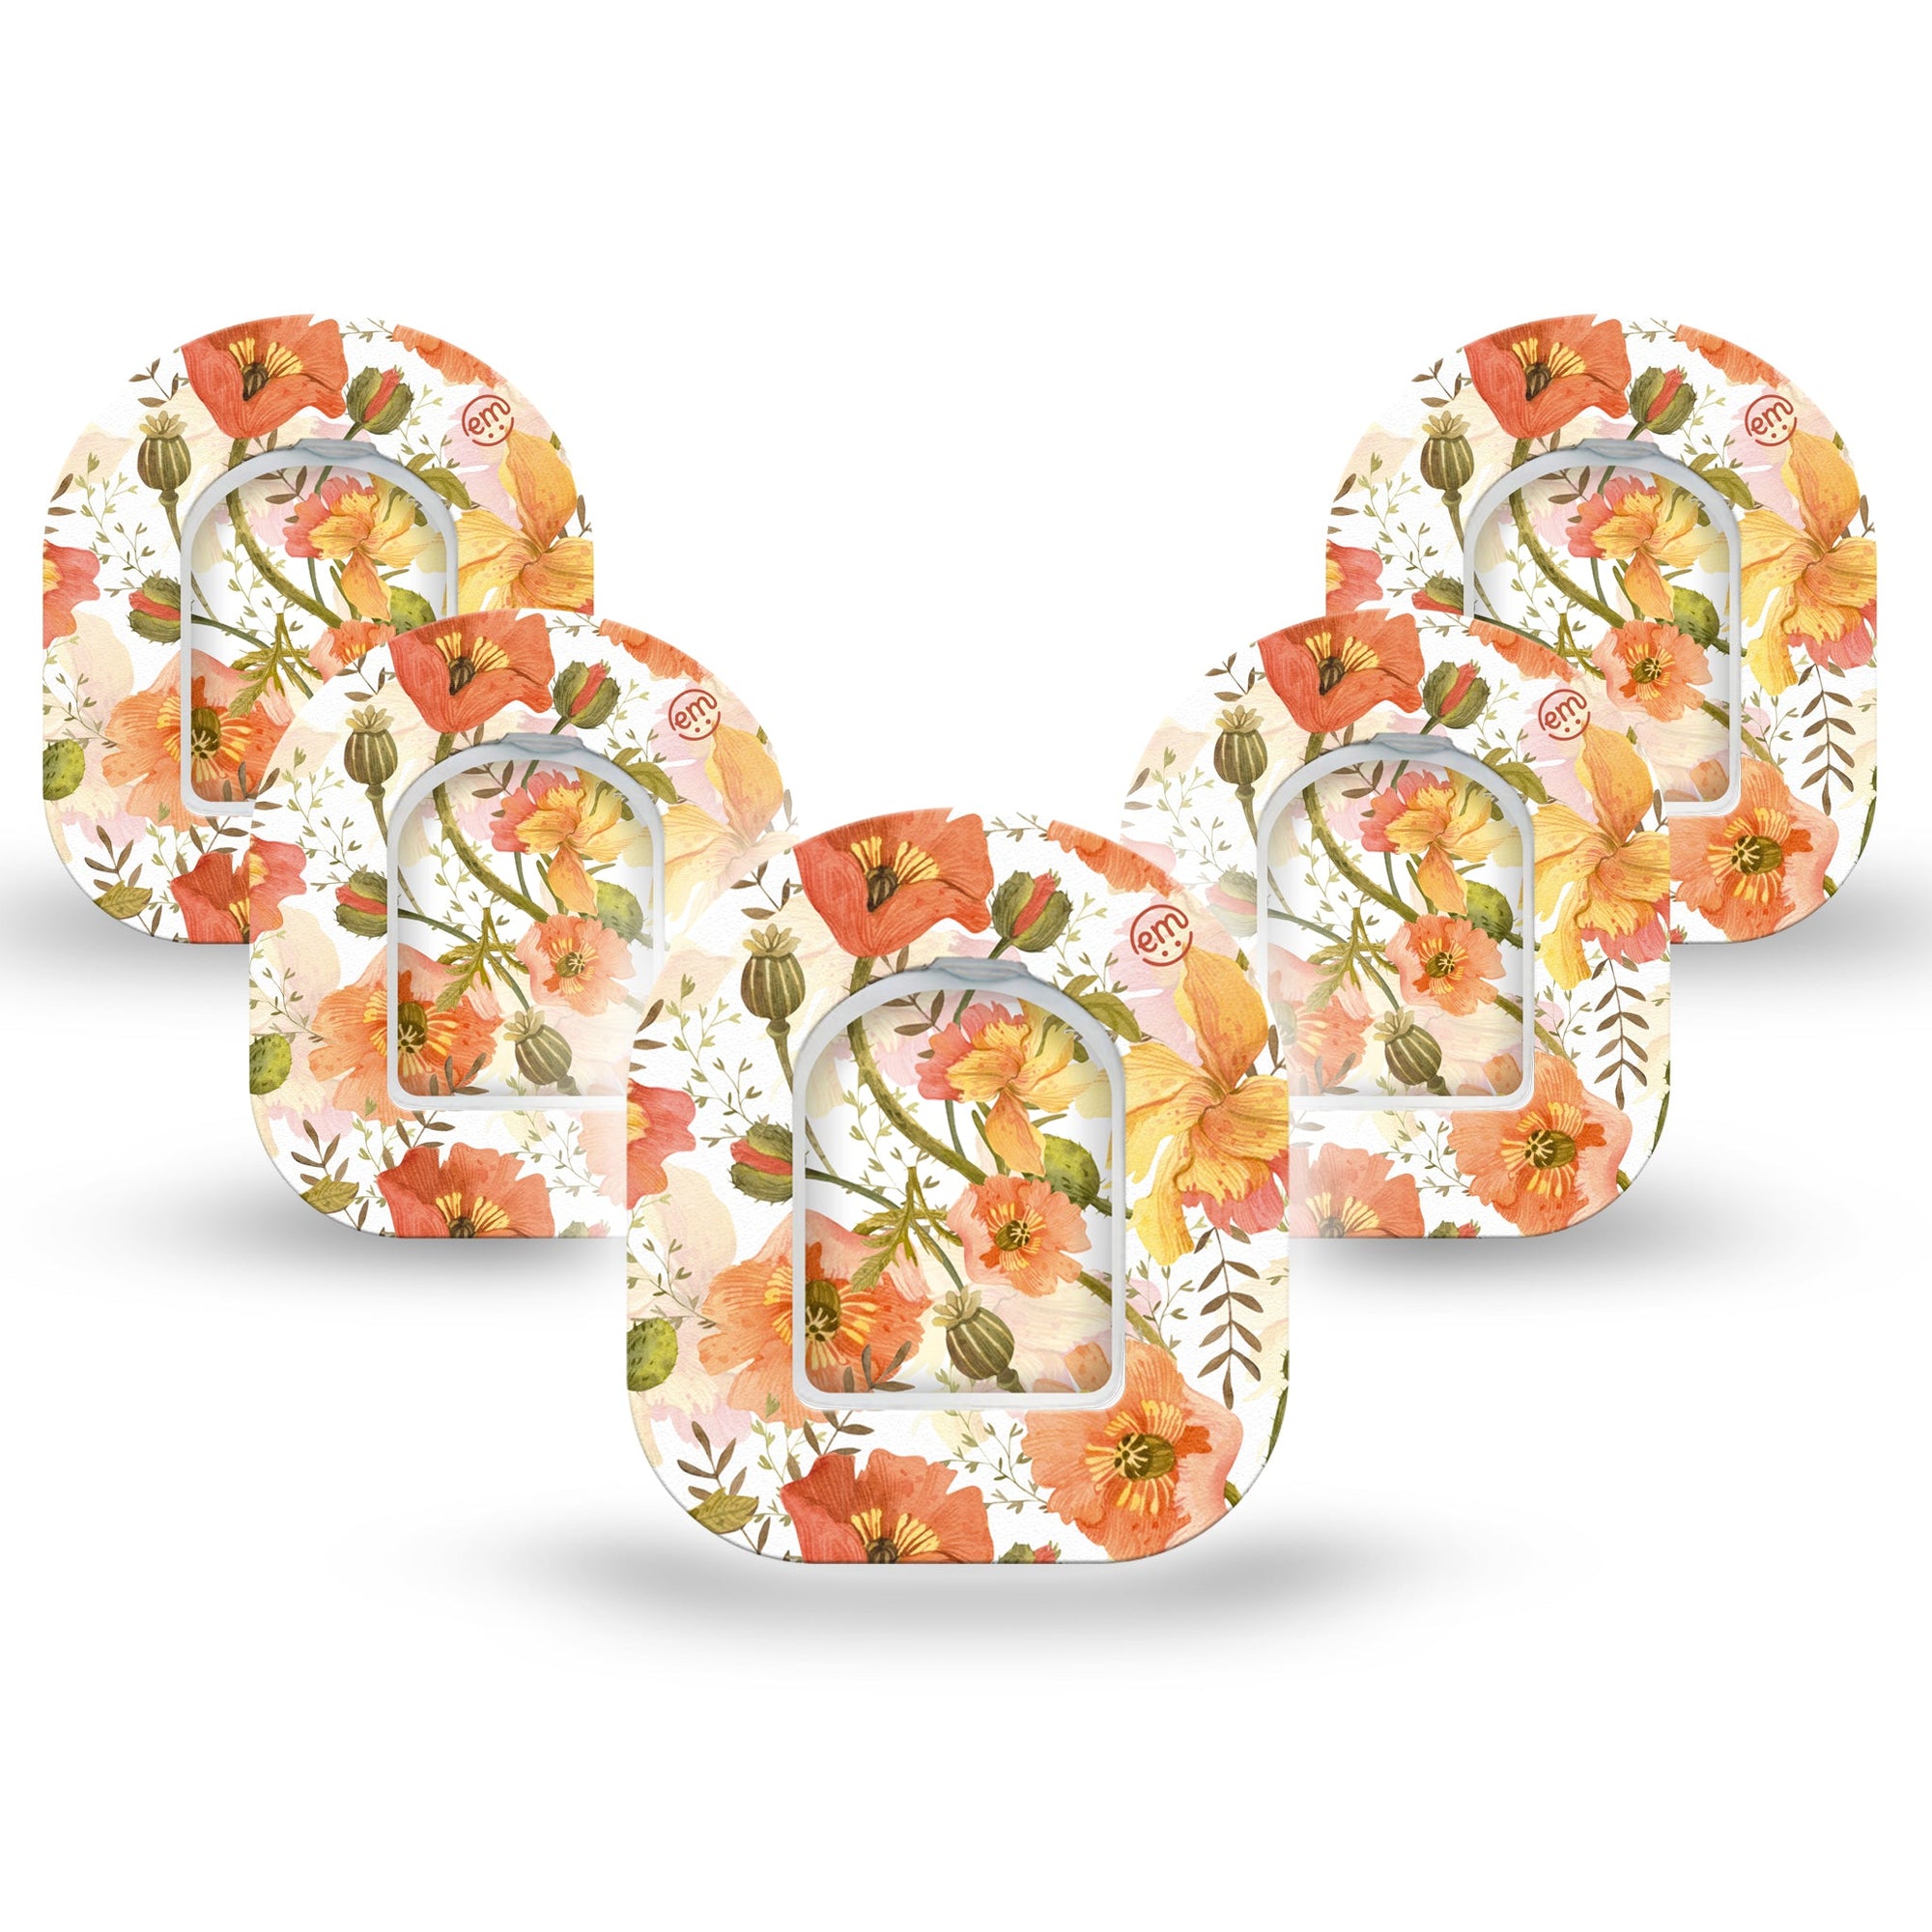 ExpressionMed Peachy Blooms Pod Mini Tape 5 Stickers and 5 Tapes, Rosy Hue Adhesive Patch Pump Design